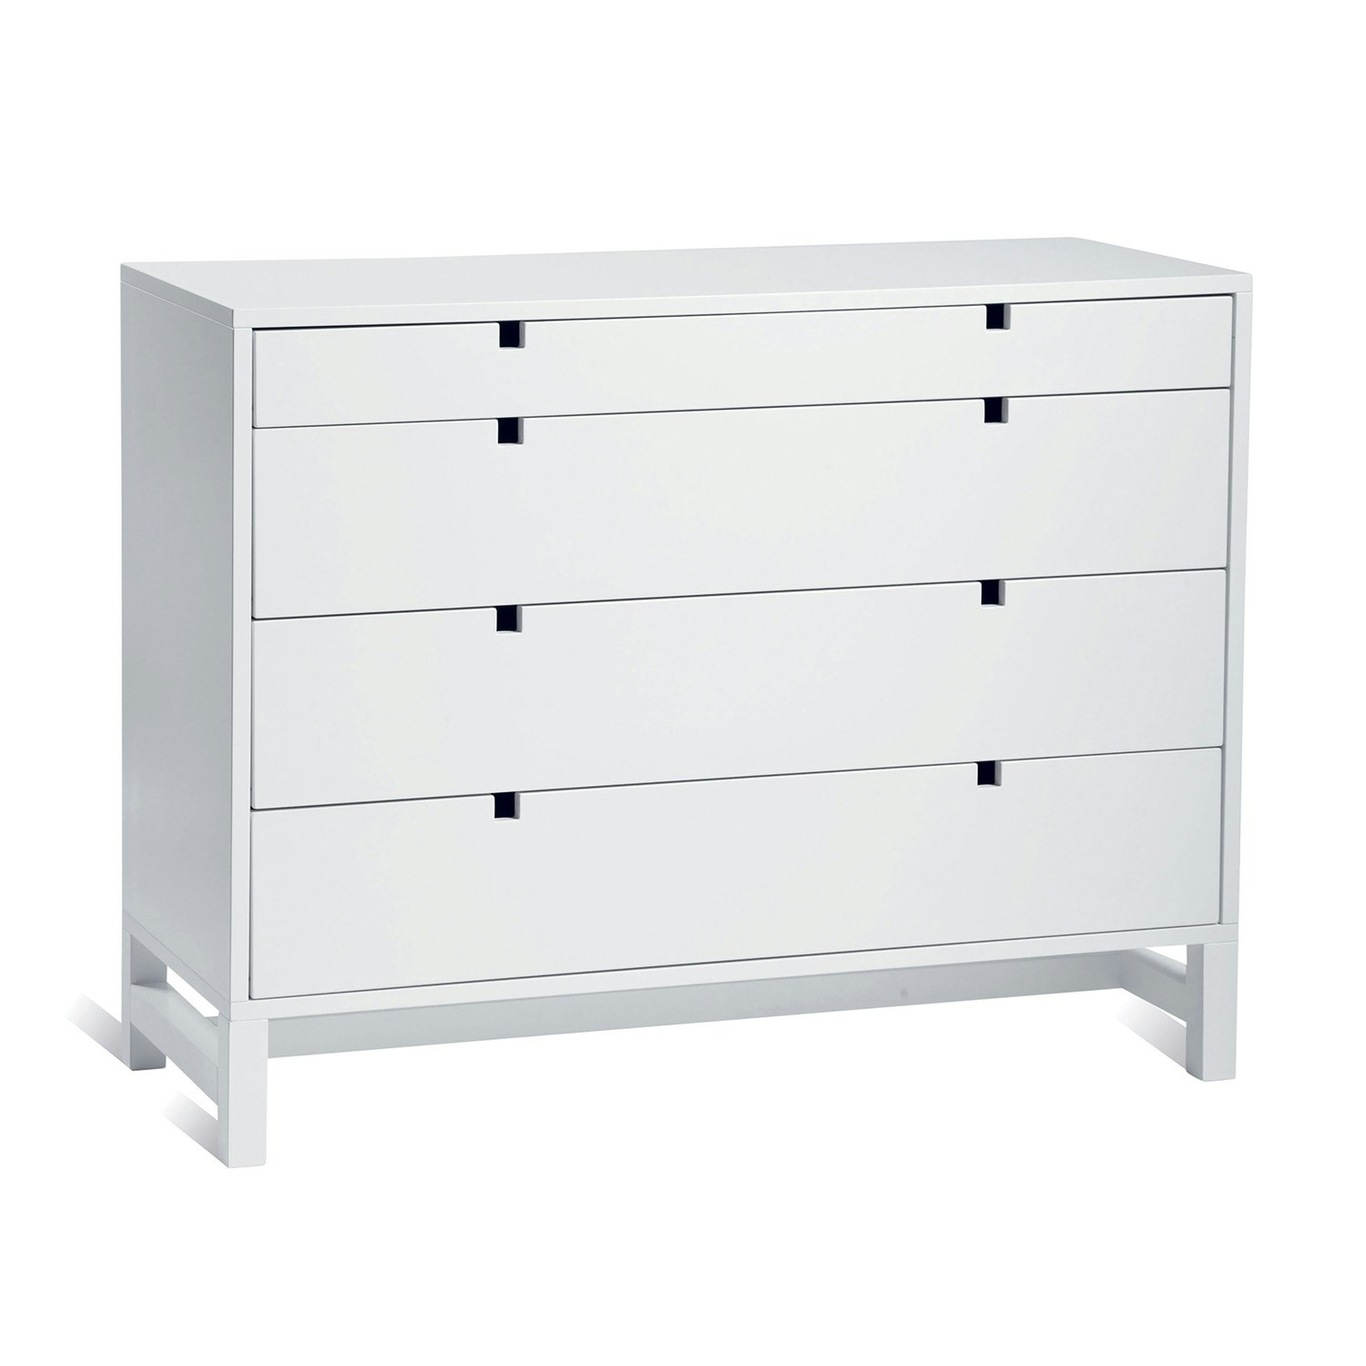 Falsterbo Chest Of Drawers, 4 Drawers, White Lacquer